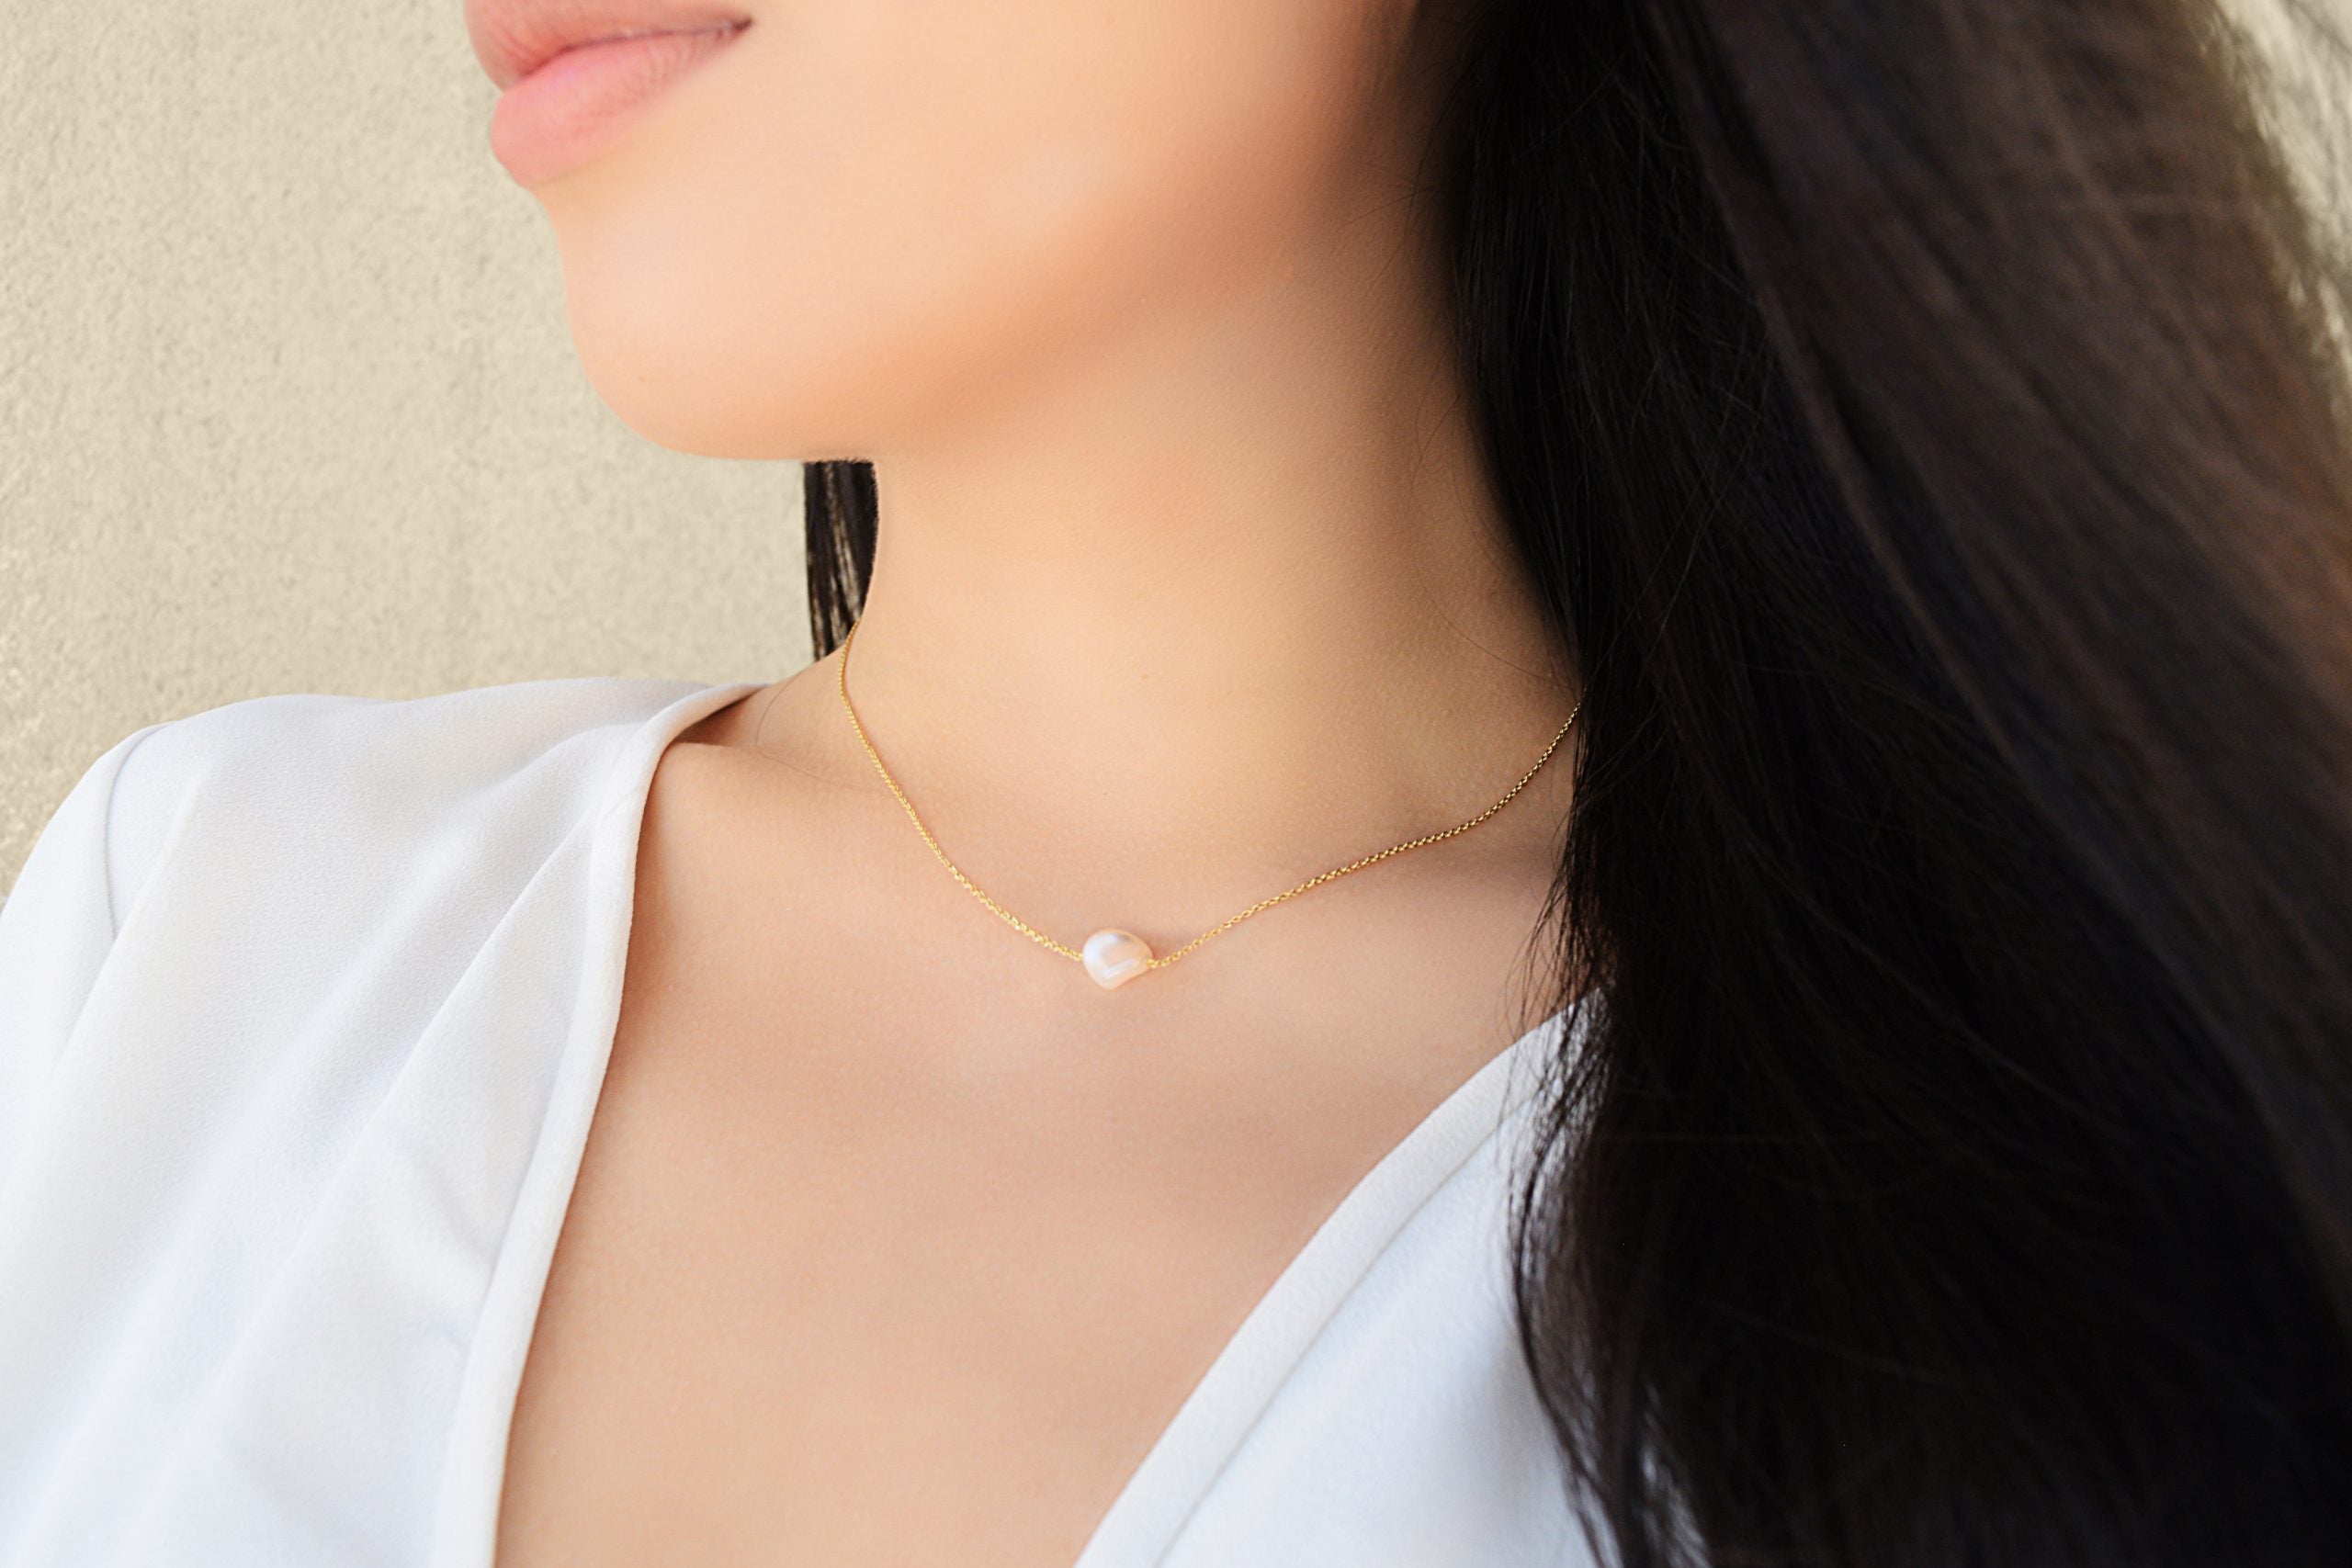 Jewellery, La Dune Necklace, Chain Necklace, 18k Gold Plated Necklace, 18k Pure Gold Necklace, Silver 925 Necklace, Long Necklace, Handmade, Pearly Crystal, Dune Shaped Crystal 